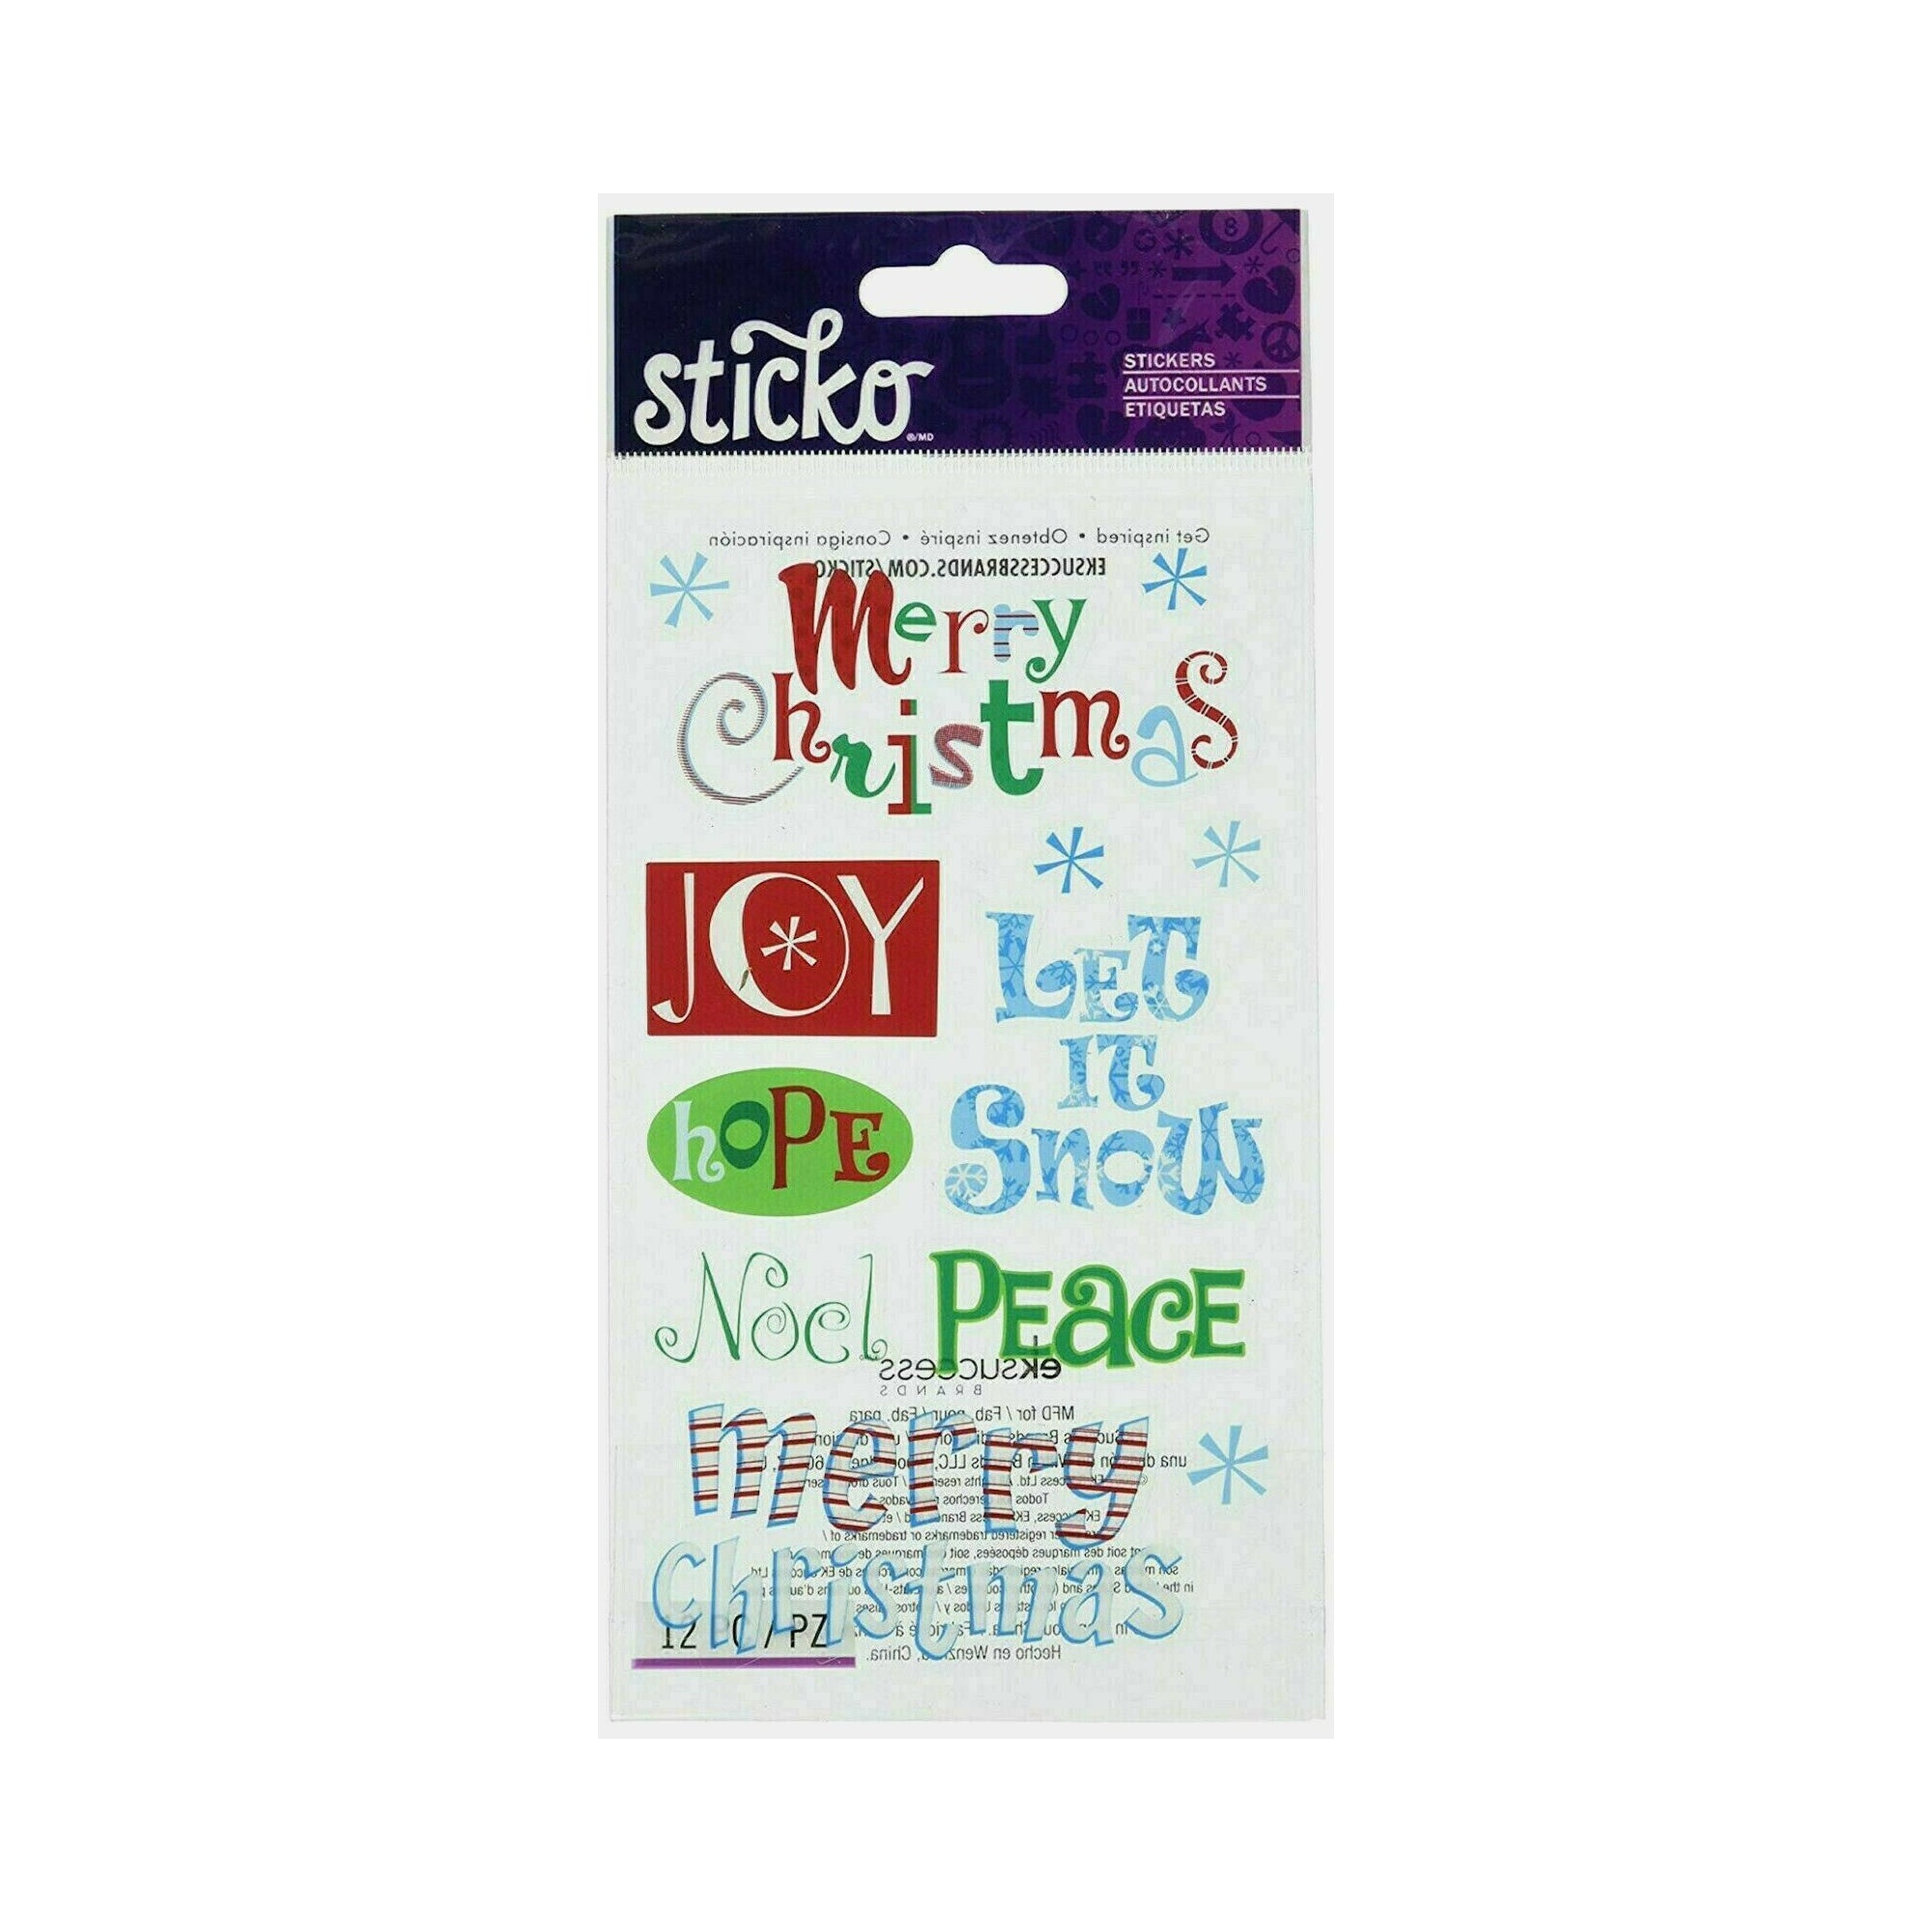 Merry Christmas Sayings 4 x 7 Scrapbook Sticker Sheet by Sticko